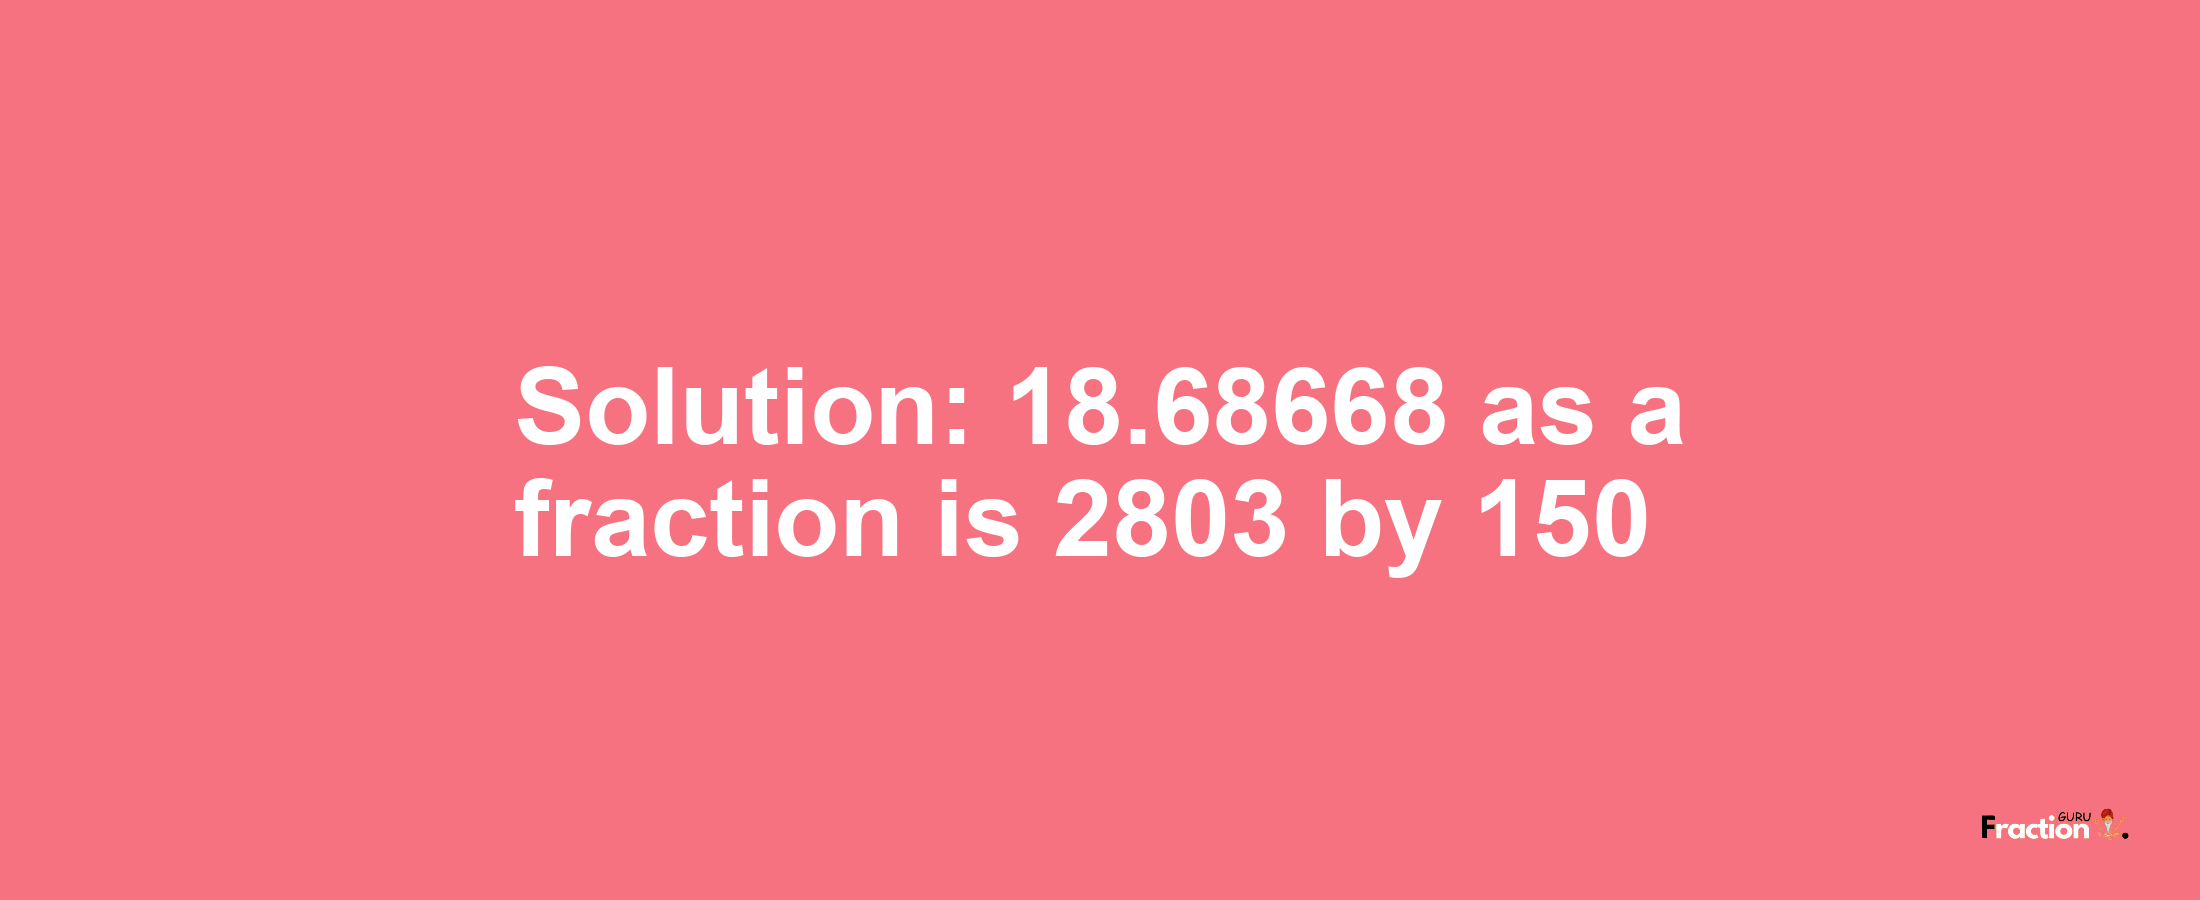 Solution:18.68668 as a fraction is 2803/150